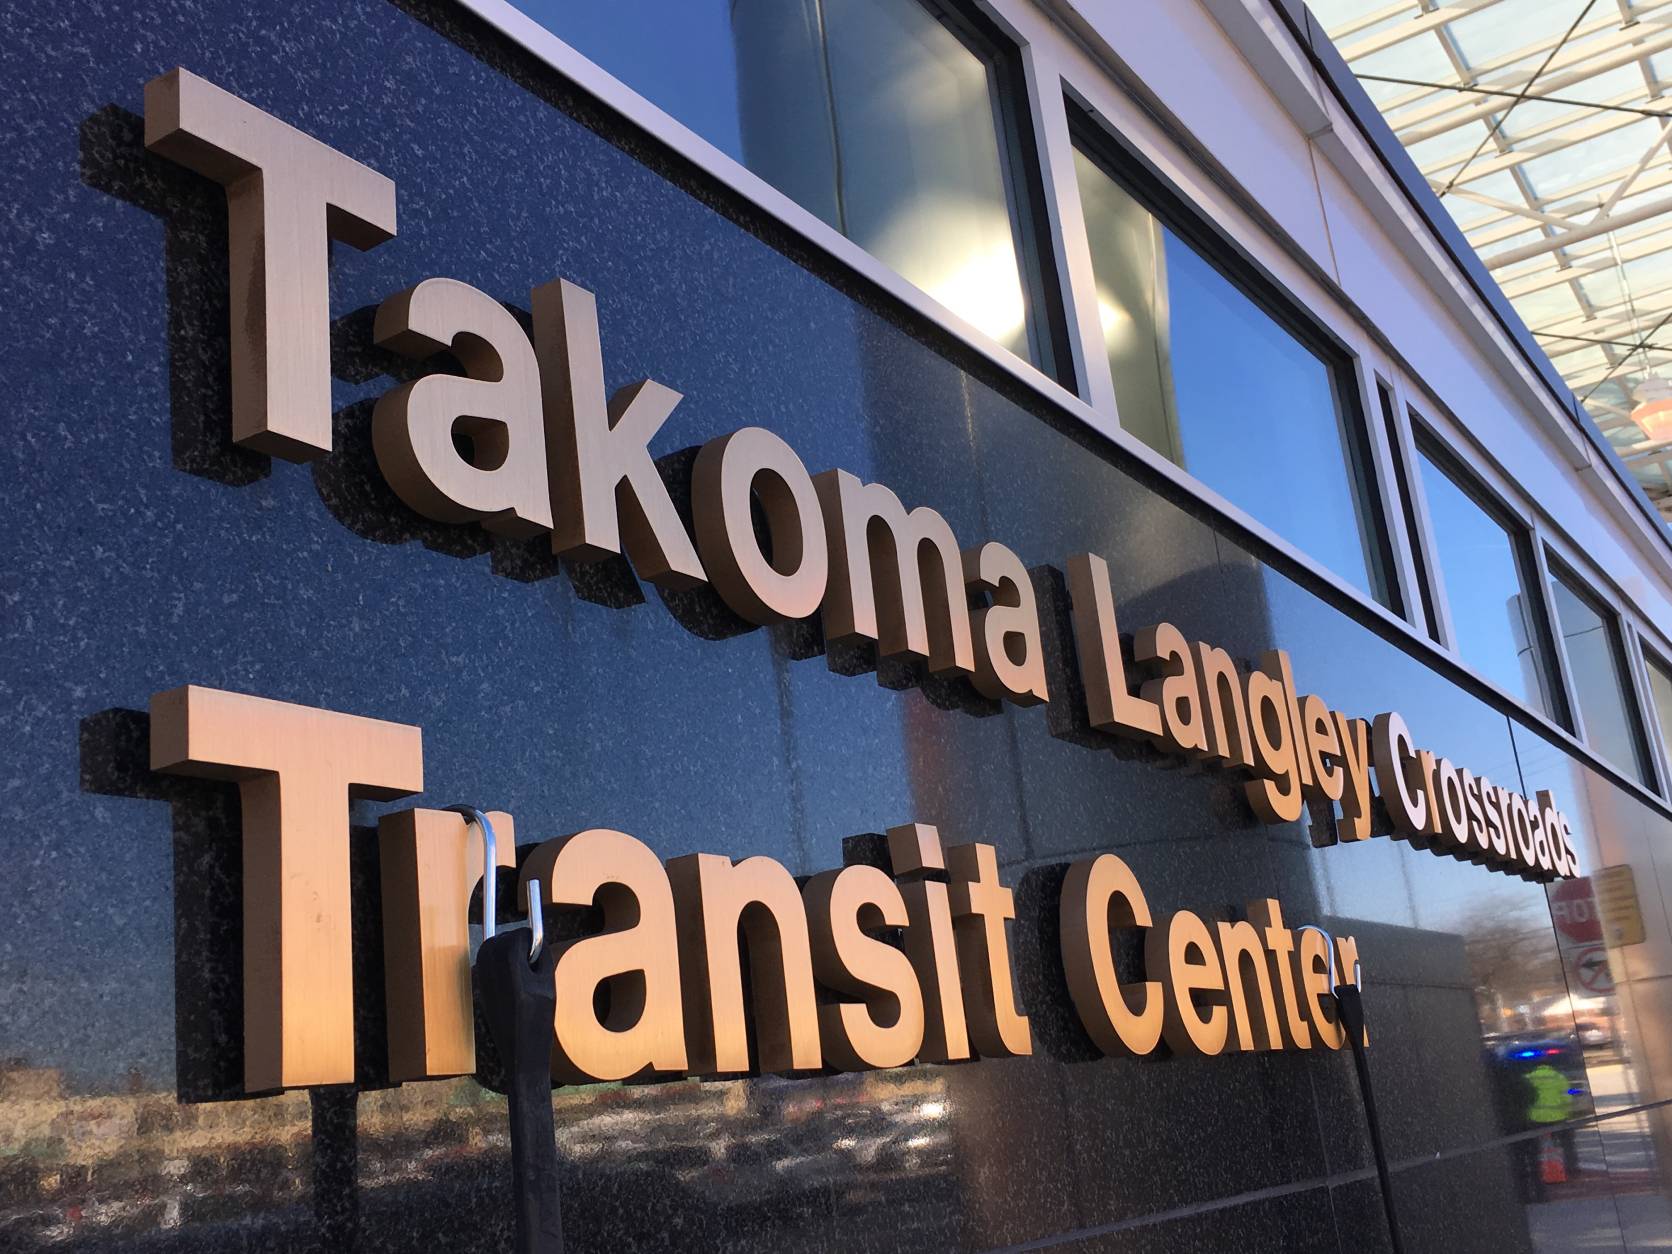 Starting Thursday, buses that serve riders whose destinations sprawl across Montgomery and Prince George's counties, will begin rolling into and out of the Takoma-Langley Crossroads Transit Center at the intersection of New Hampshire Avenue and University Boulevard. (WTOP/Kate Ryan)